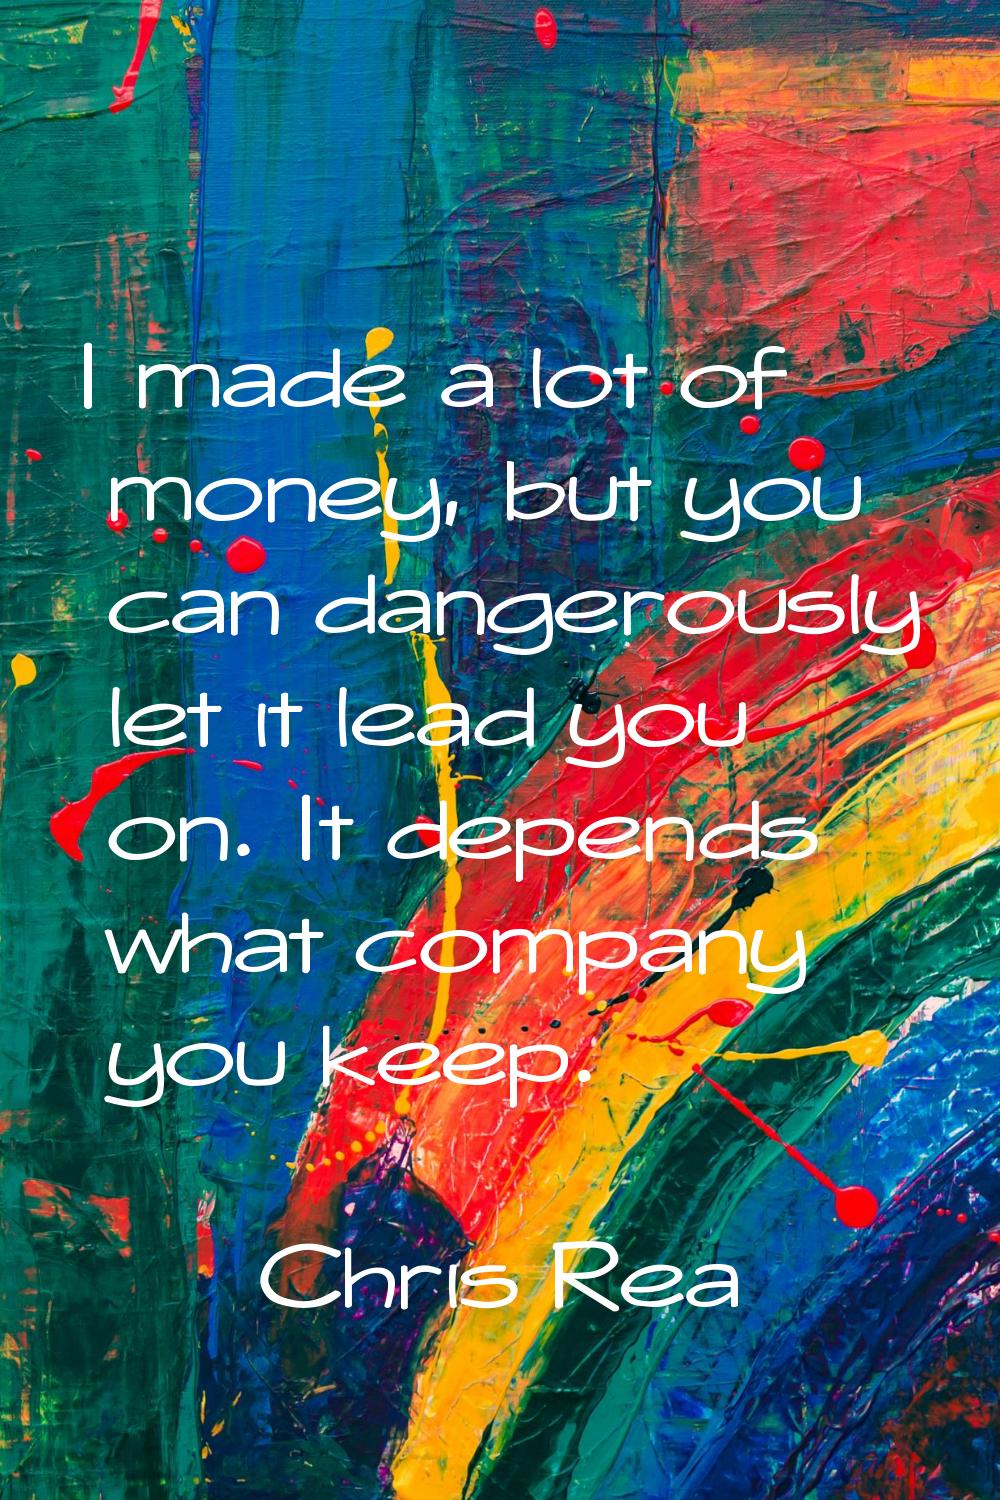 I made a lot of money, but you can dangerously let it lead you on. It depends what company you keep